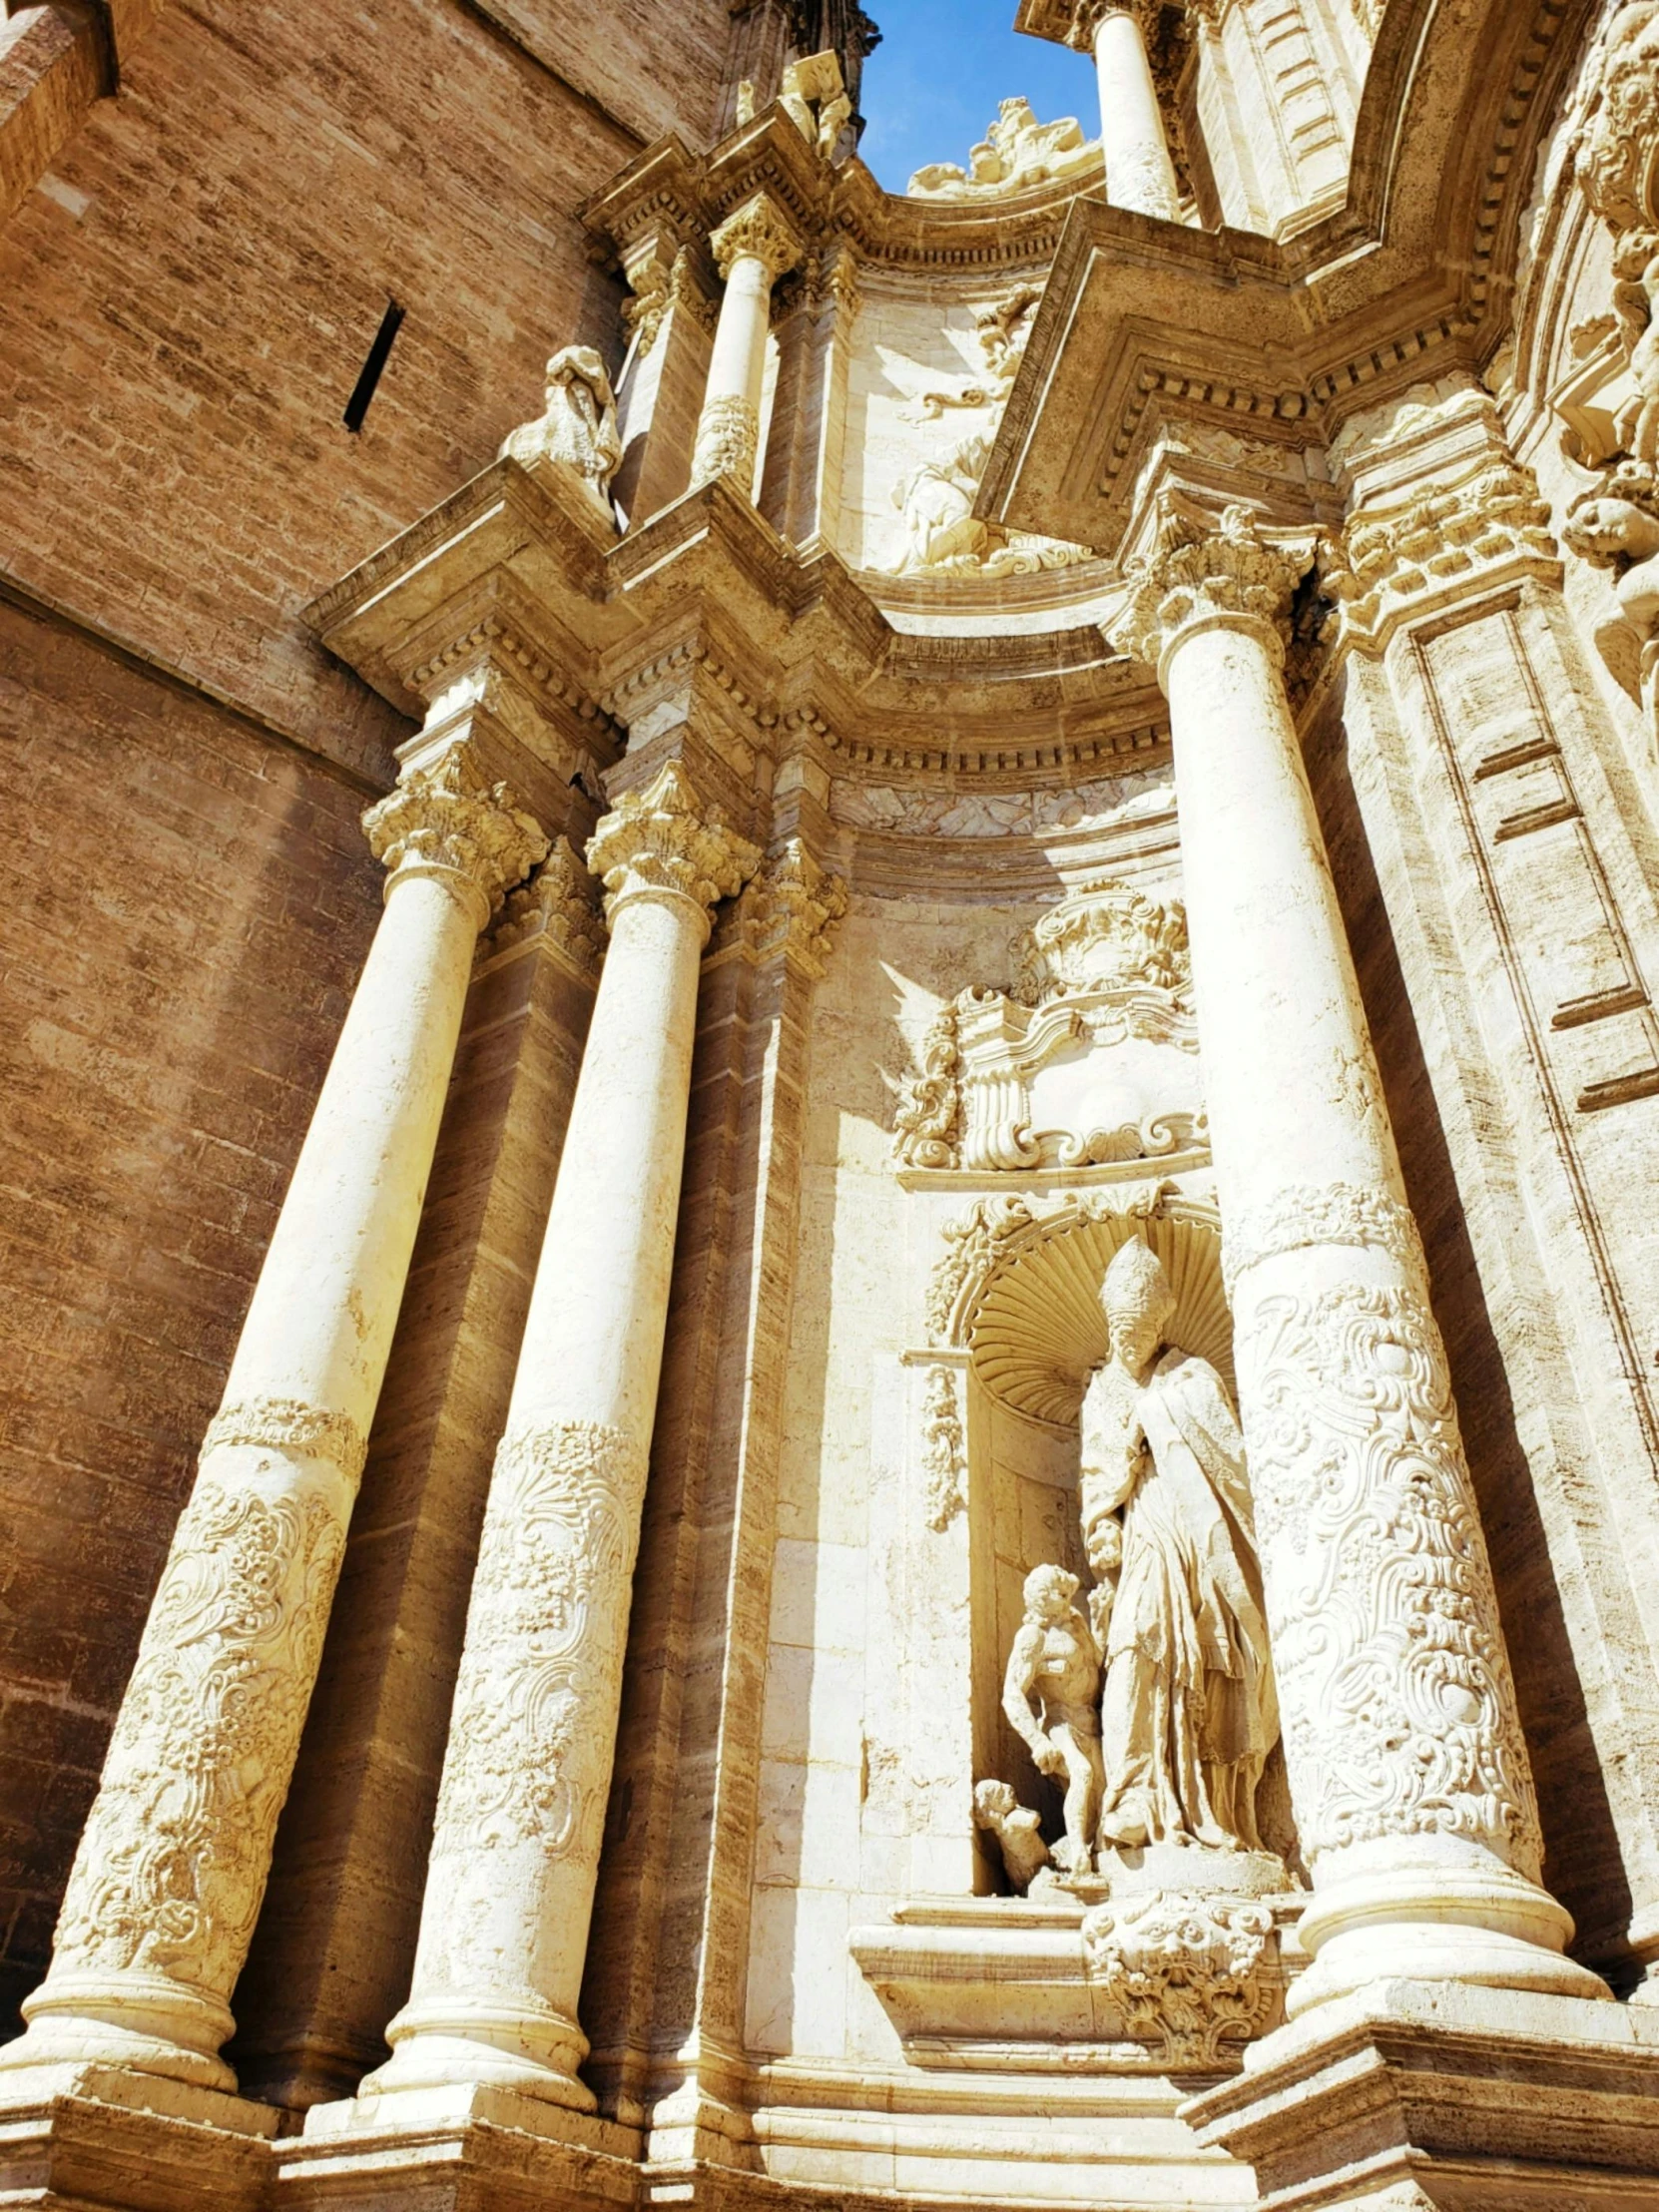 the architecture of a cathedral features ornate pillars